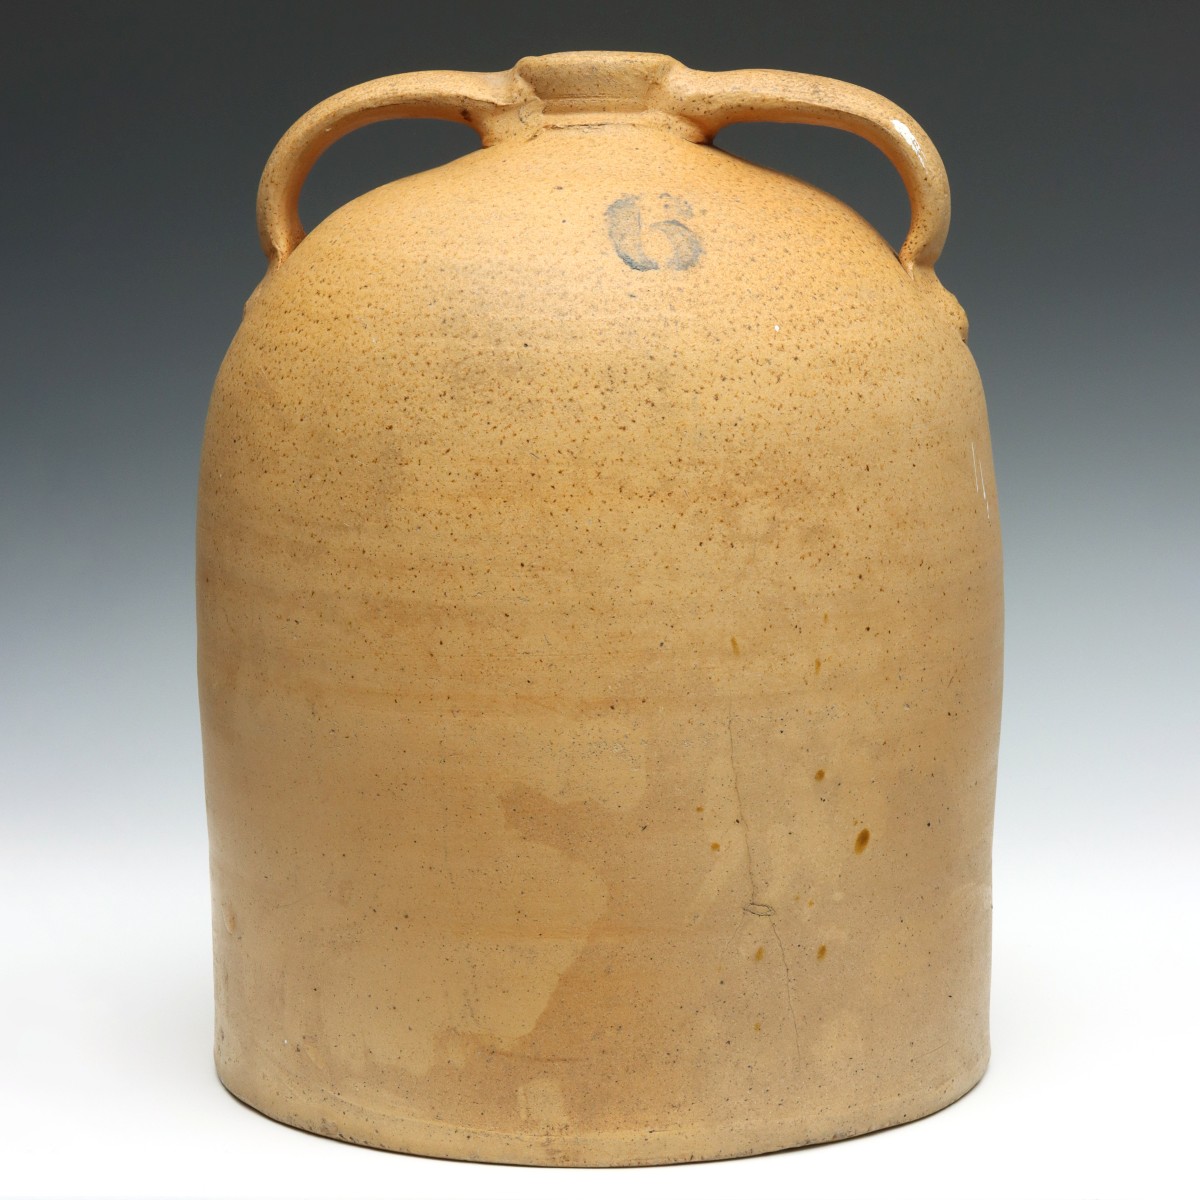 A LARGE BEEHIVE FORM STONEWARE JUG WITH TWO HANDLES